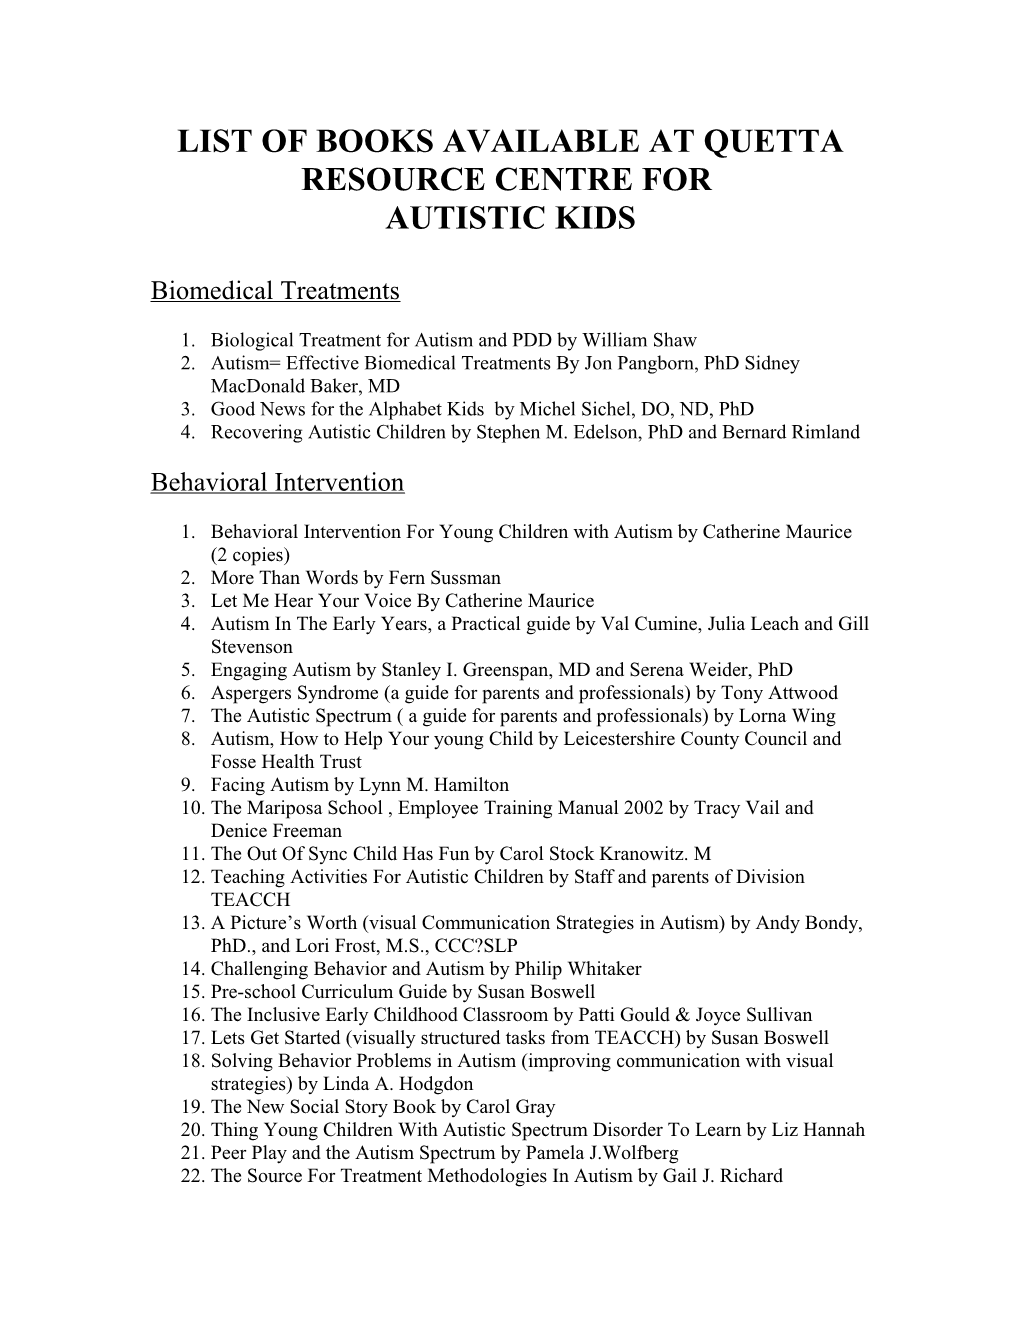 List of Books Available at Quetta Resource Centre For